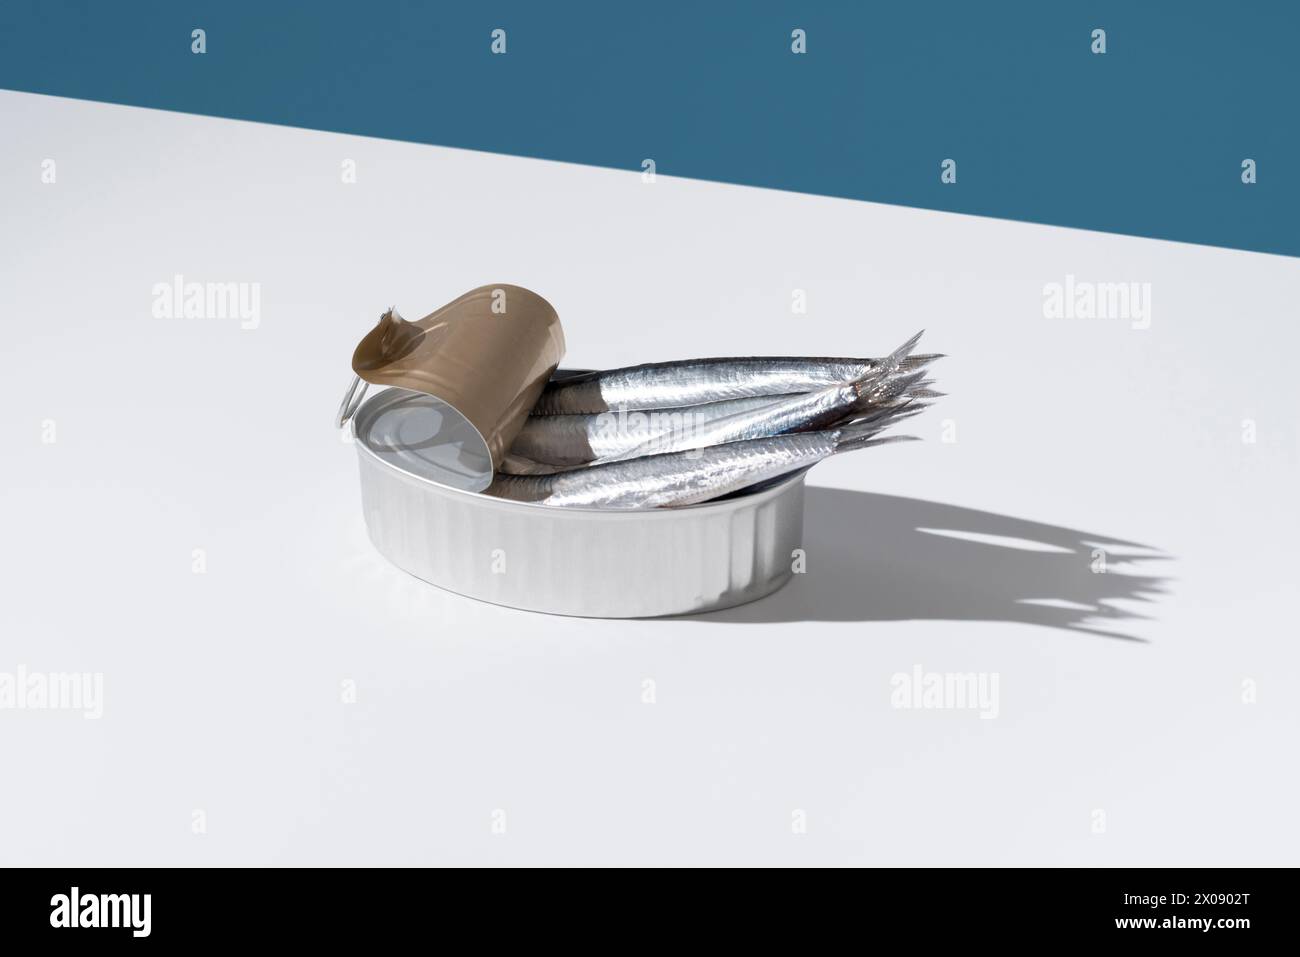 Gleaming fresh anchovies overflow from an unlidded tin can, set against a sharp blue and white divide, casting playful shadows Stock Photo